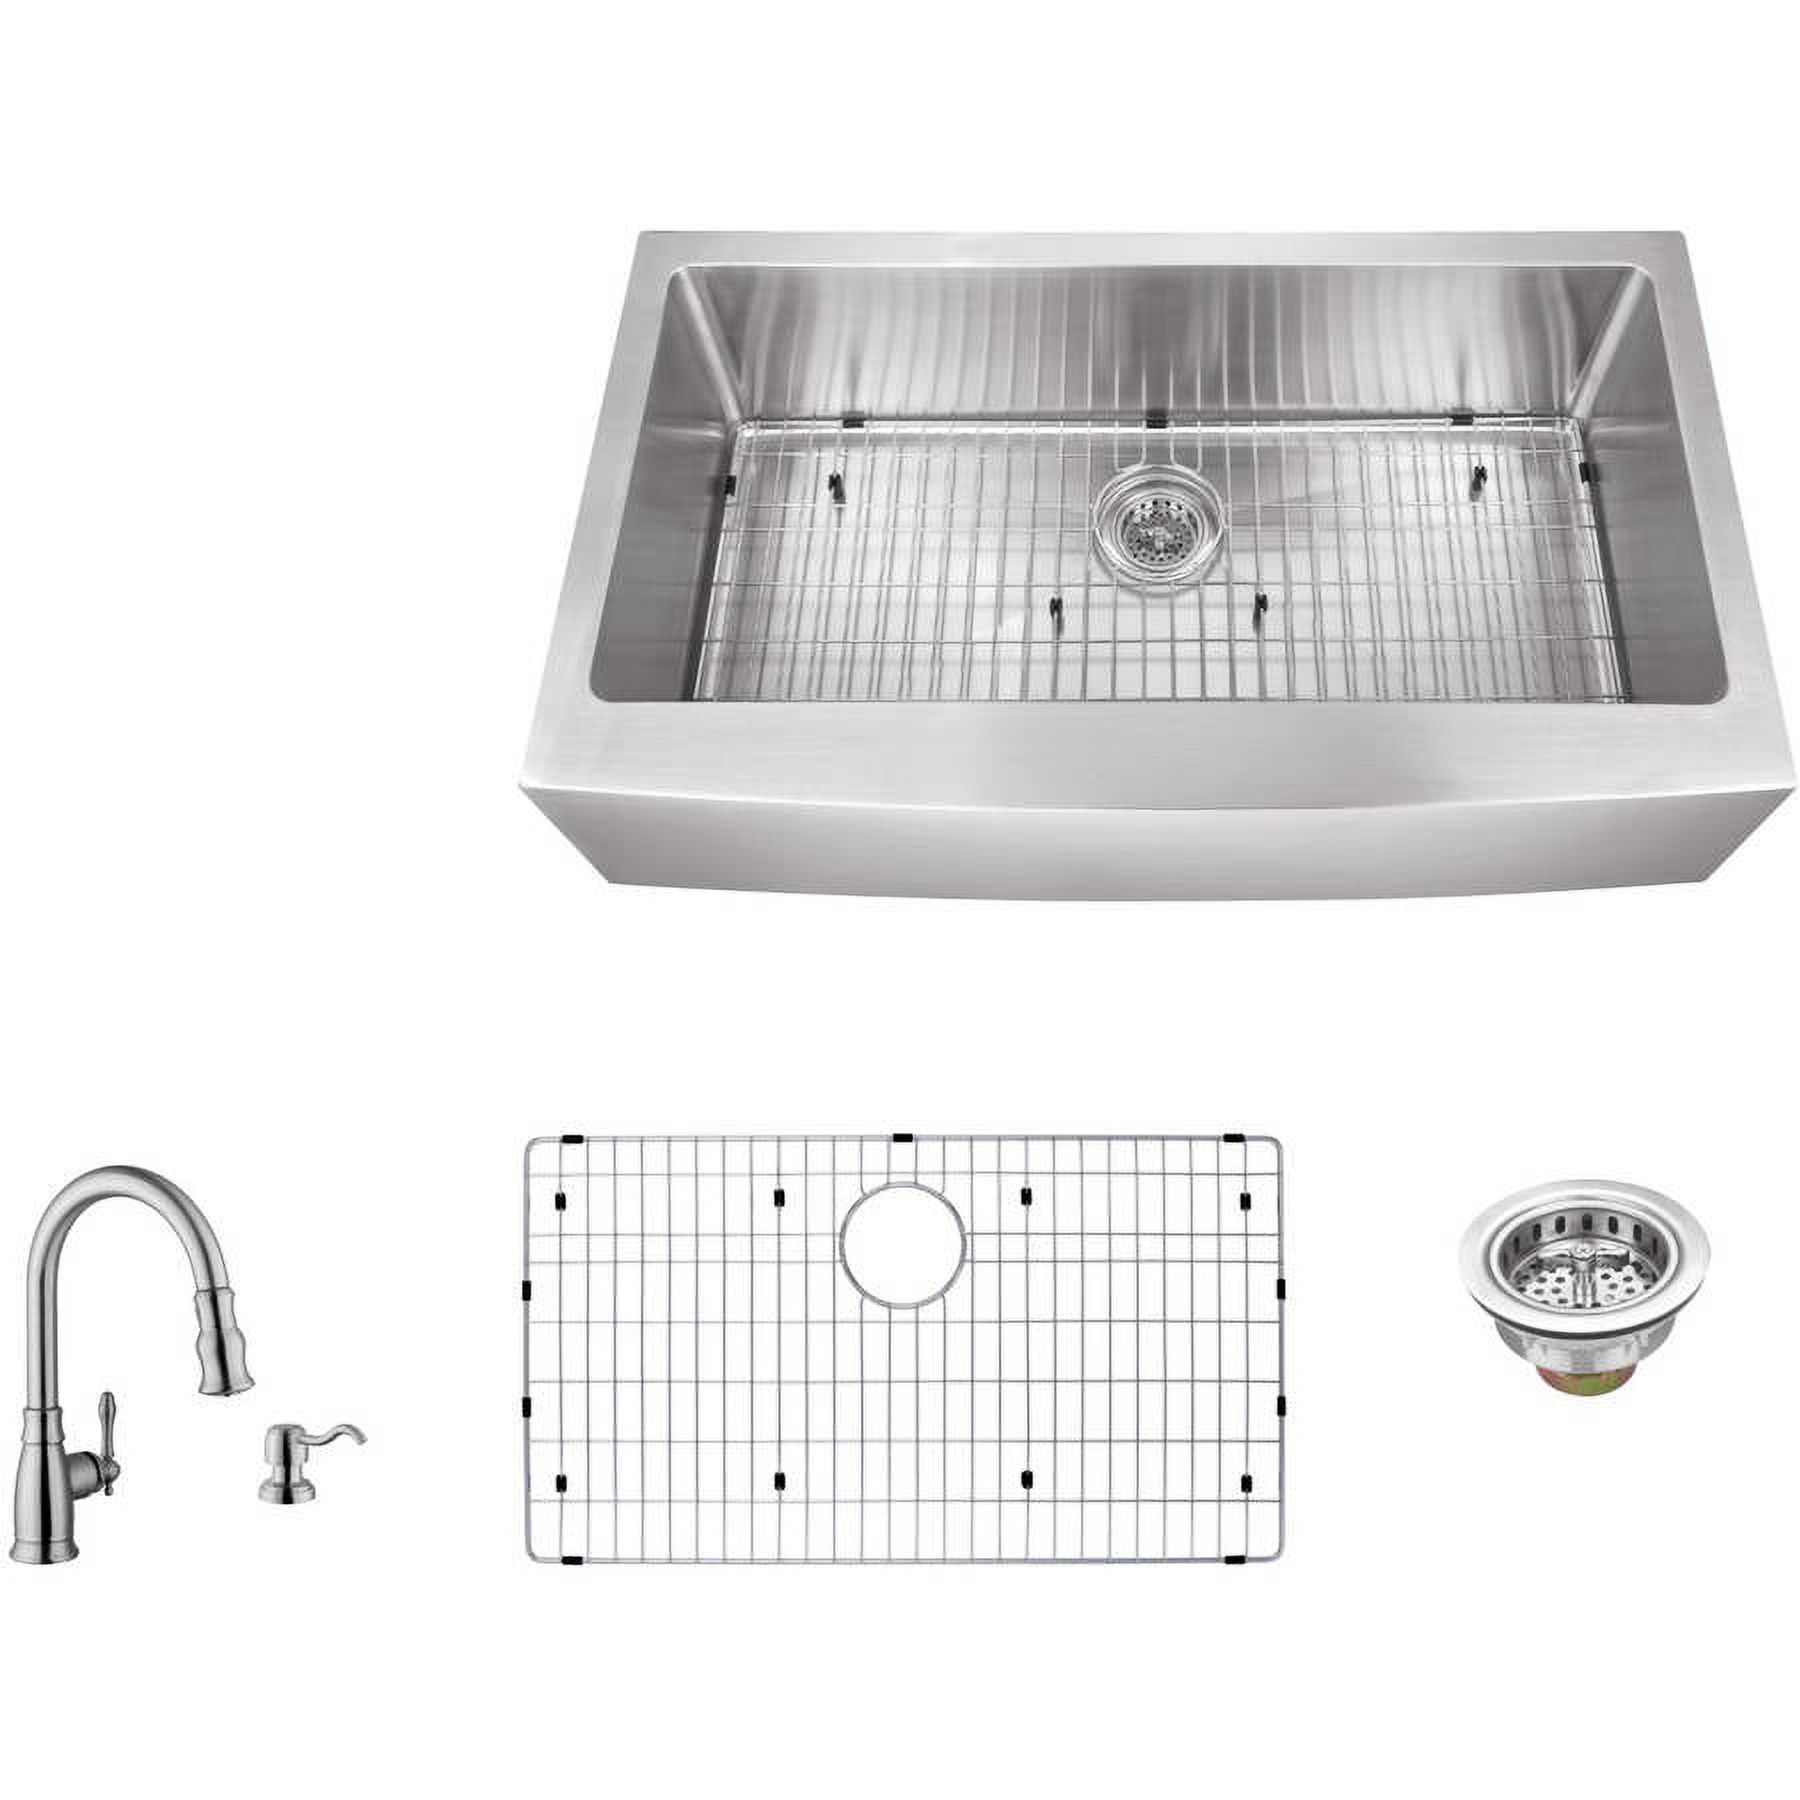 Magnus Sinks 36-in x 20-in 16 Gauge Stainless Steel Apron Front Single Bowl Kitchen Sink with Arc Kitchen Faucet - image 1 of 7